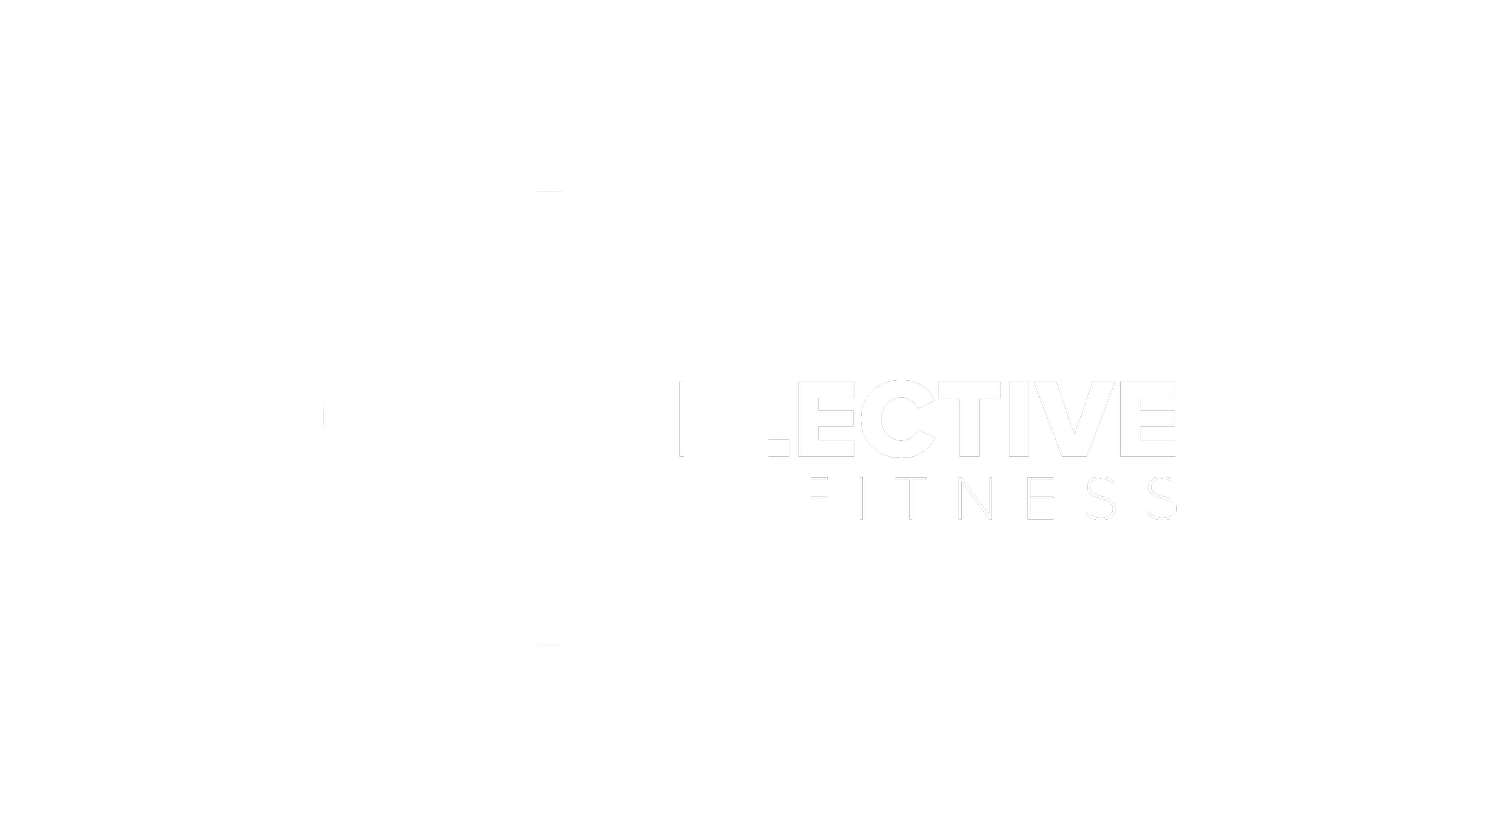 Collective Fitness